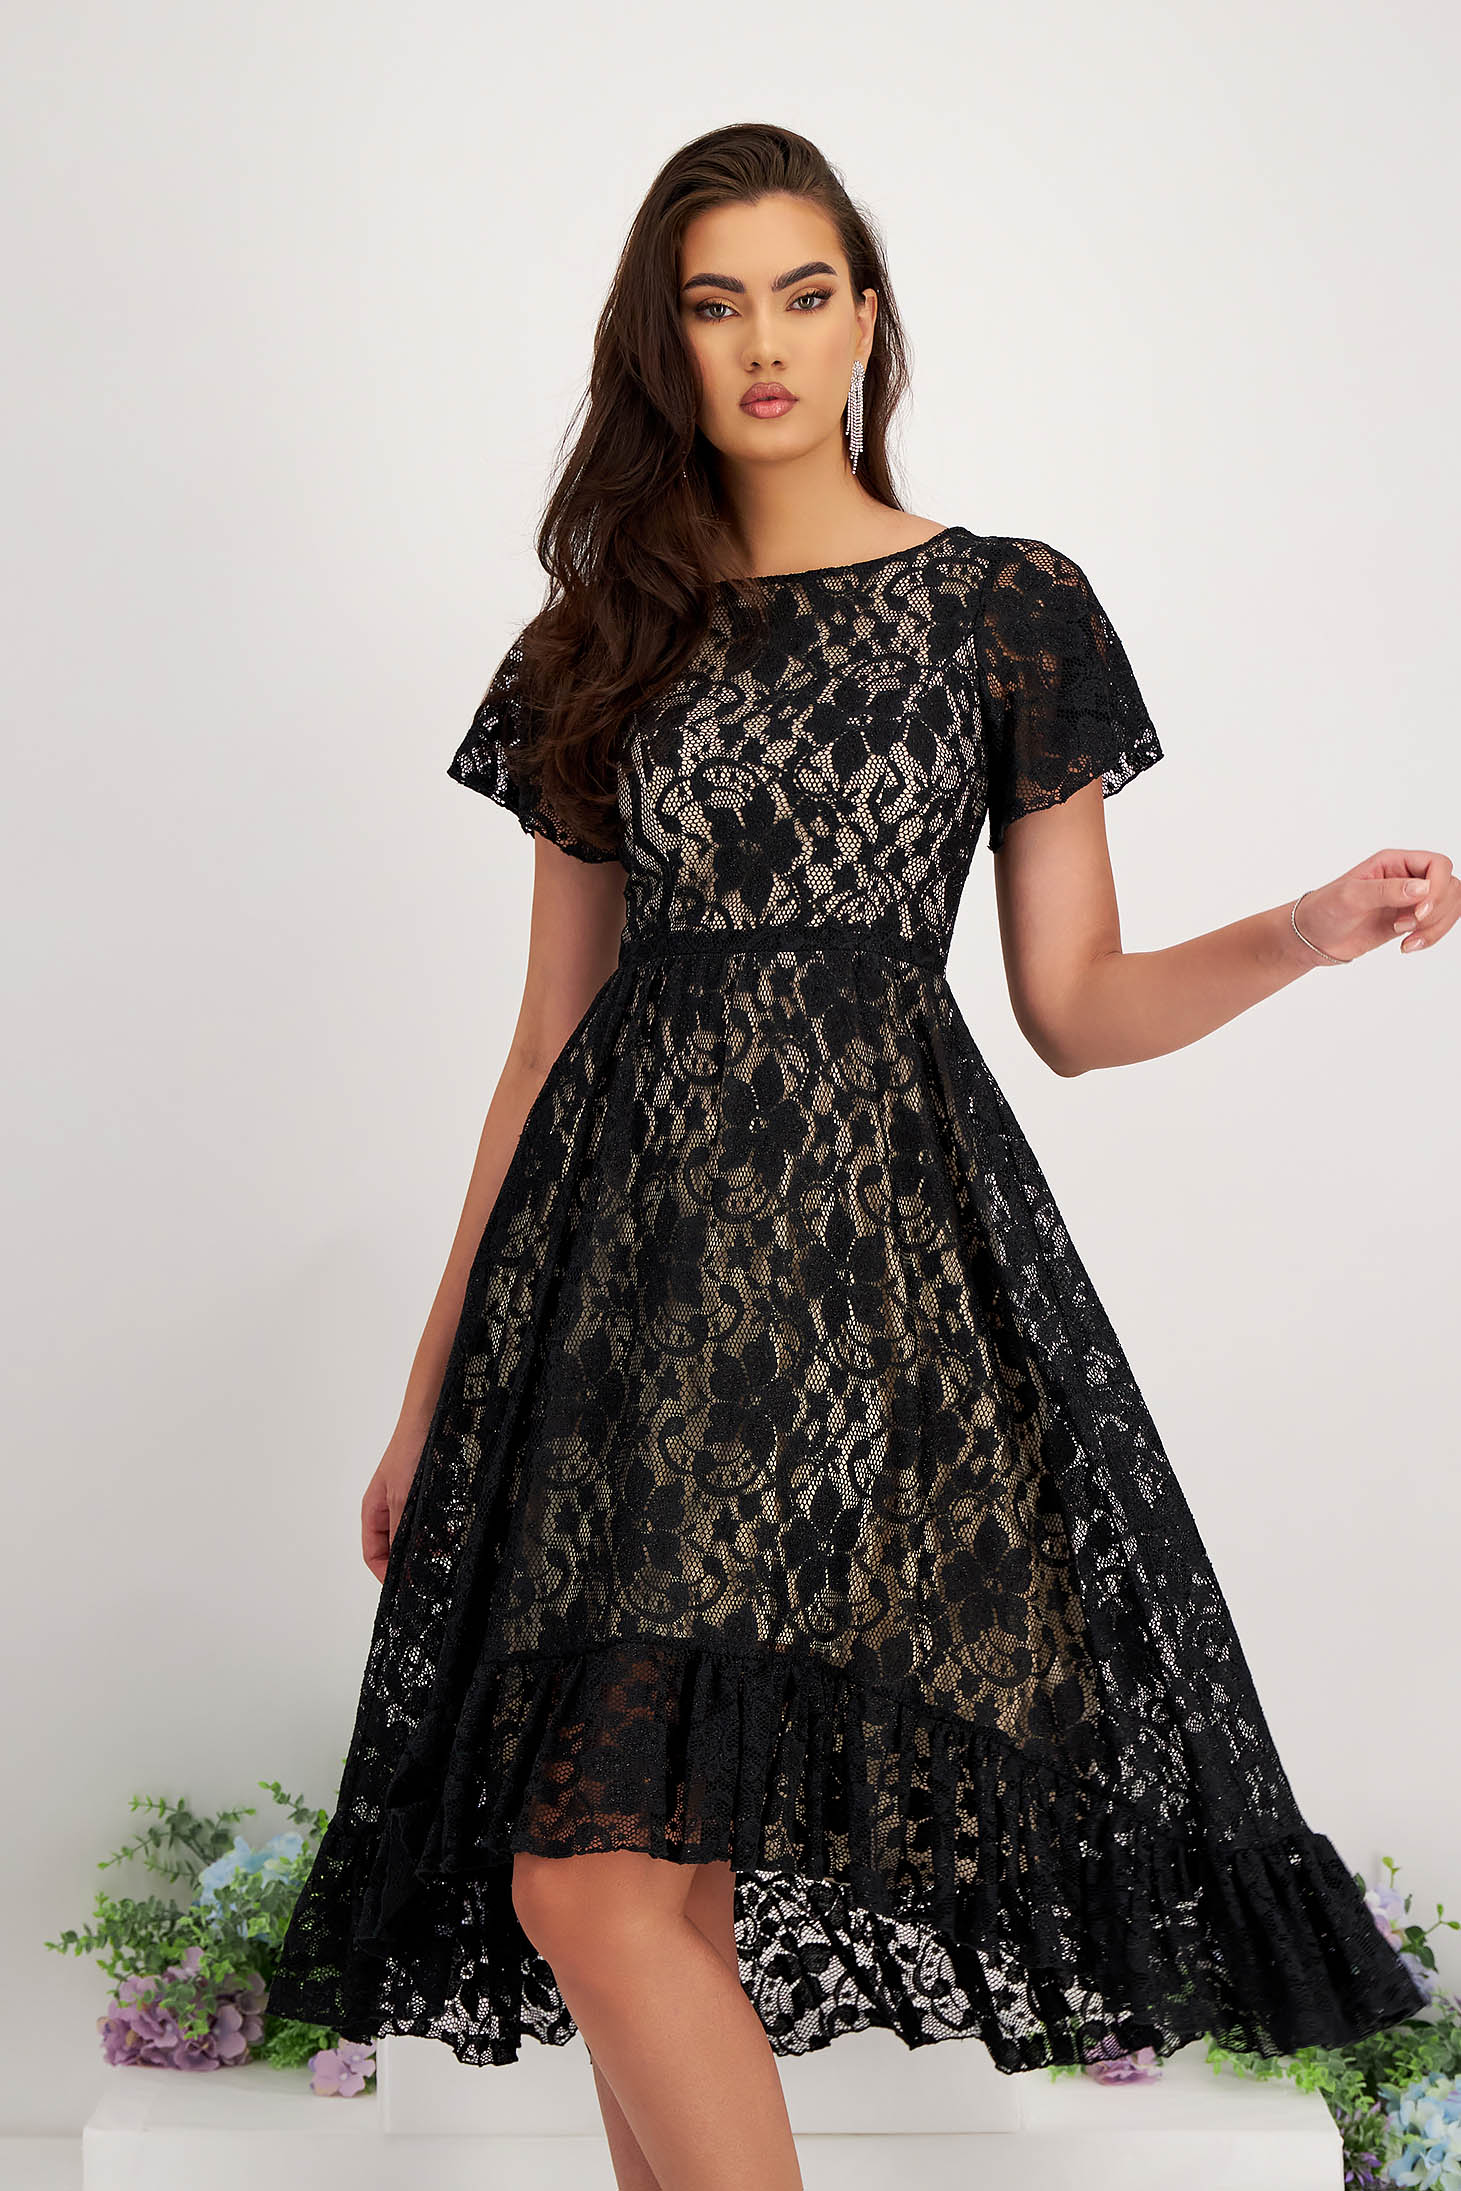 Asymmetrical Black Lace Dress in A-line with Butterfly Sleeves - StarShinerS 1 - StarShinerS.com